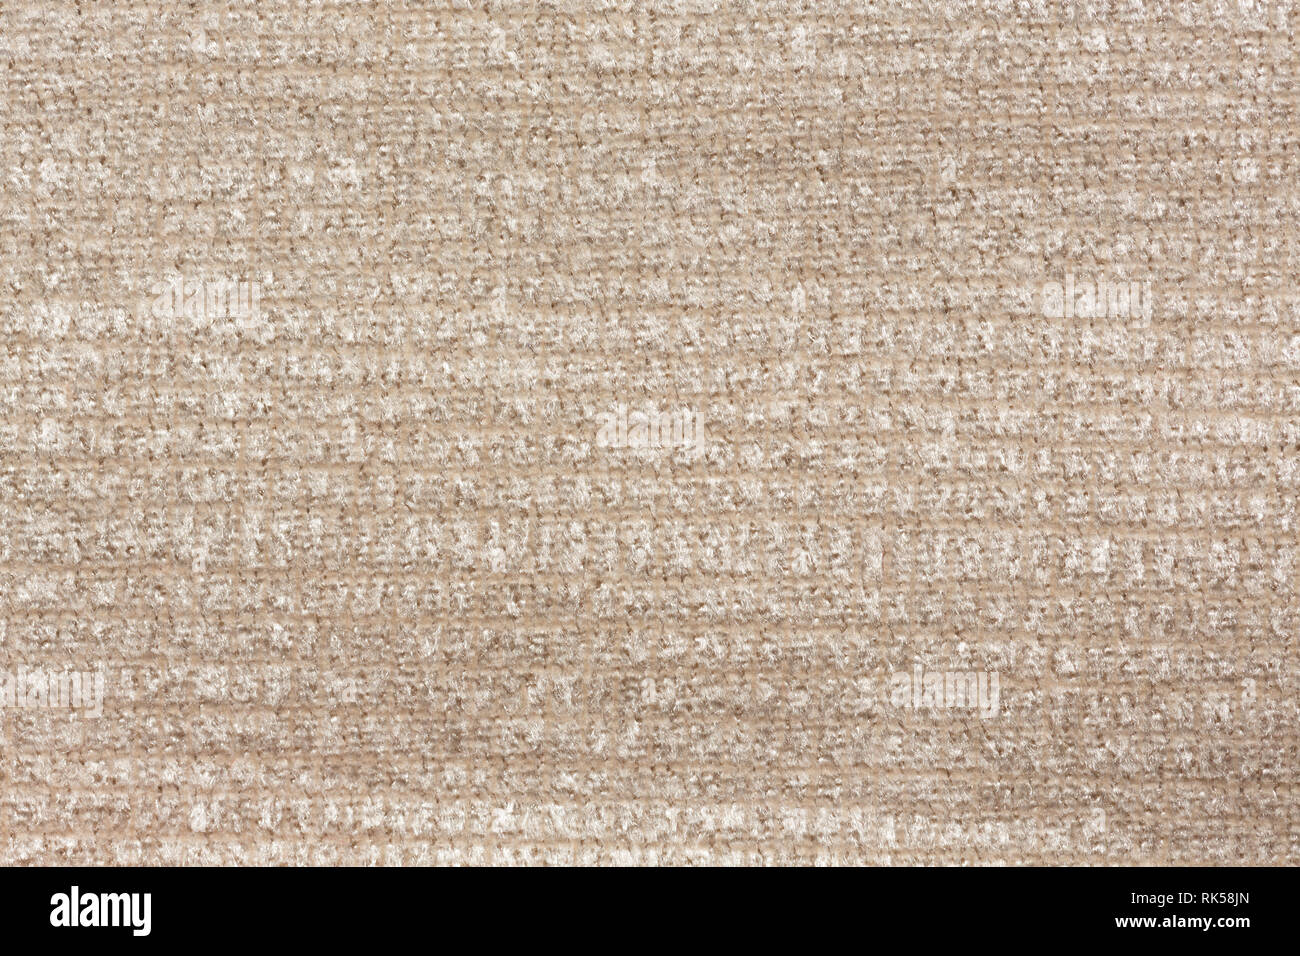 Premium Photo  Grunge beige waffle weave fabric cotton background in macro  view, top image of weave napkin